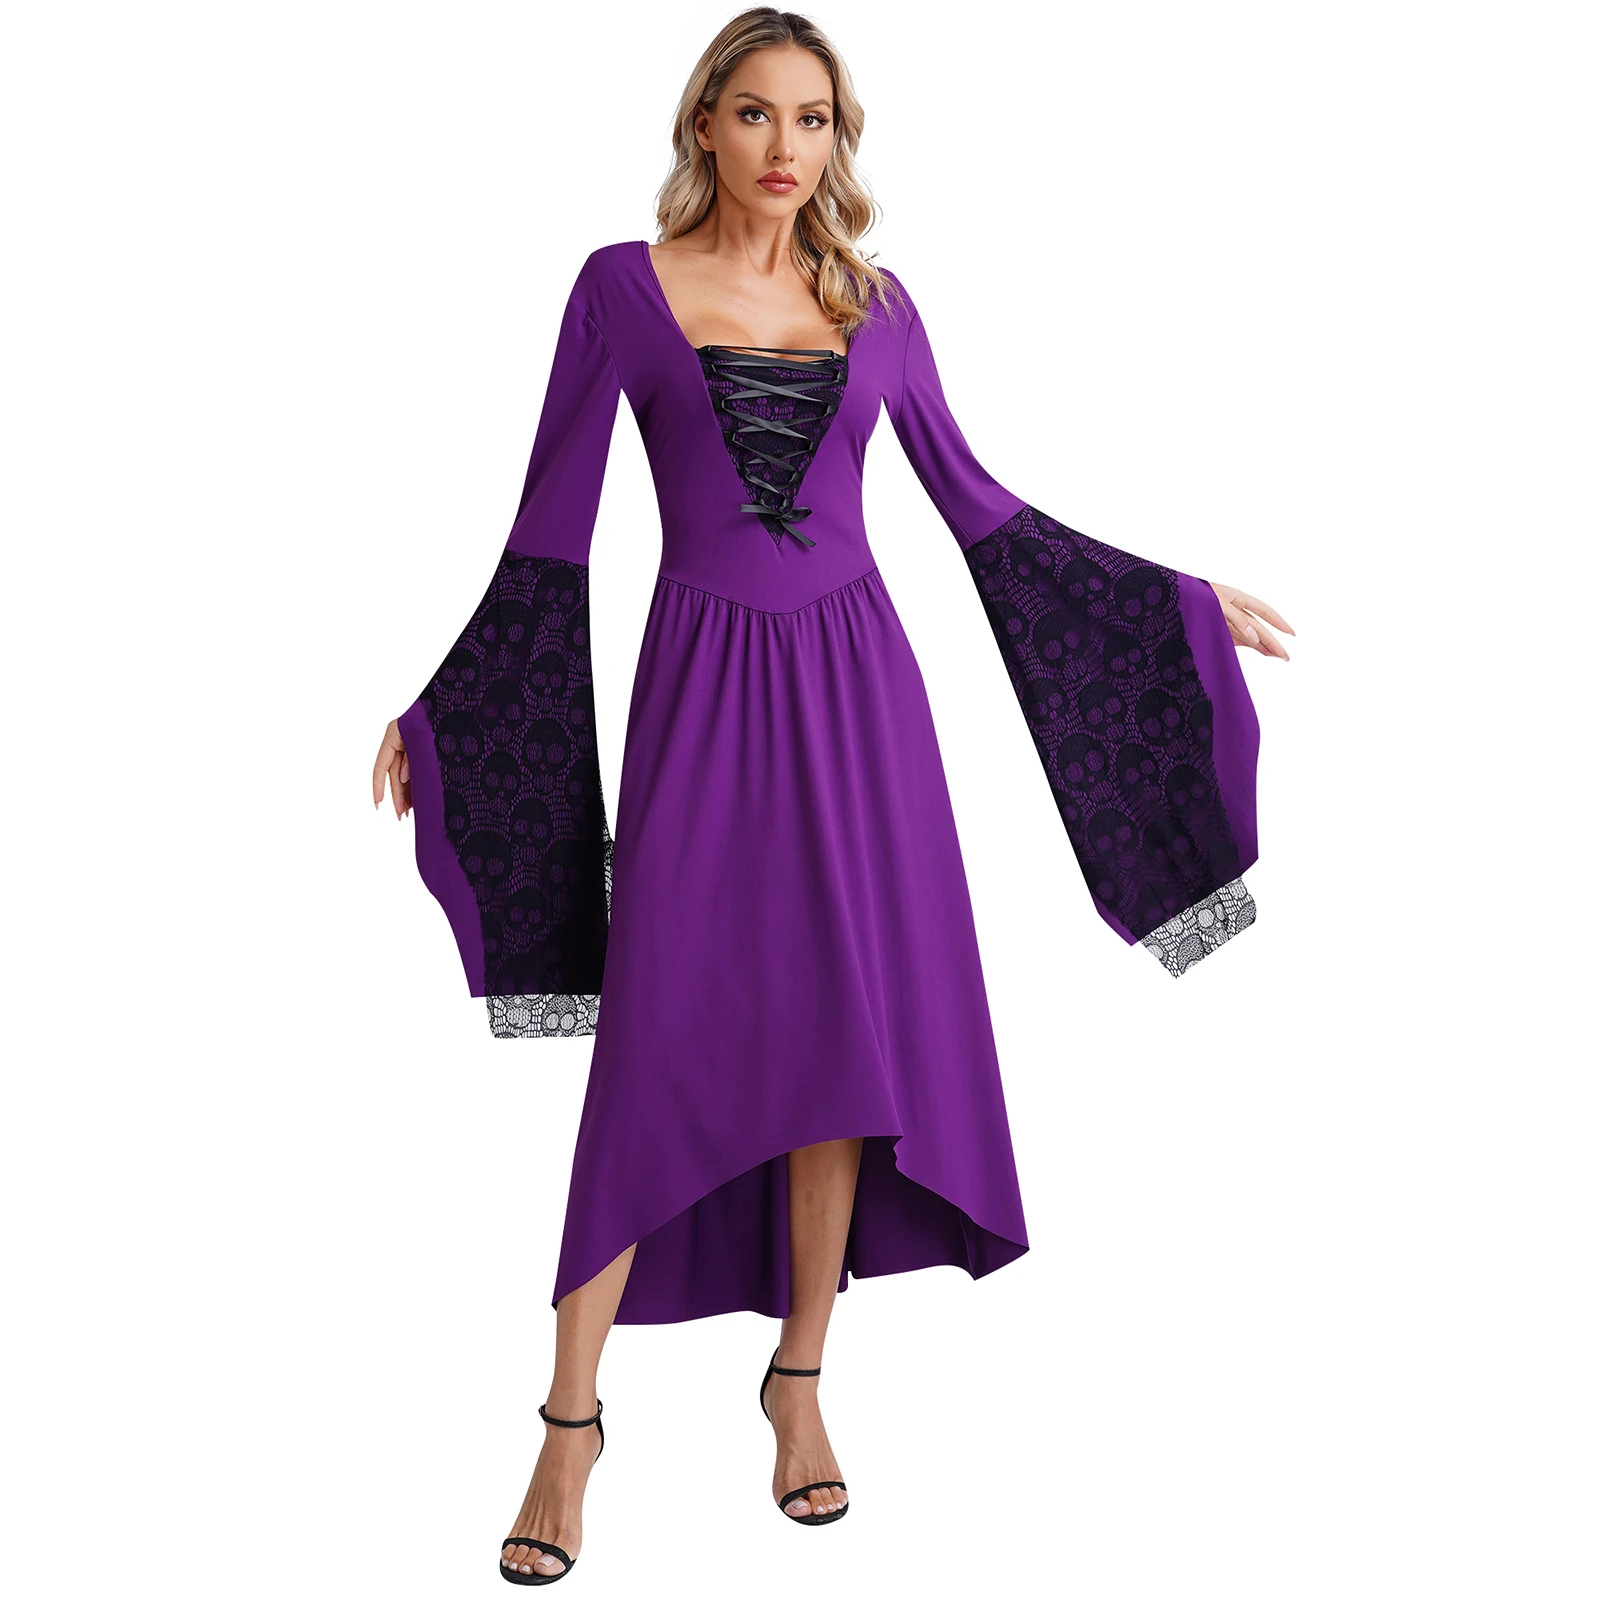 

Womens Witch Vampire Cosplay Costume Medieval Renaissance Gothic Dress Skull Lace Flare Sleeve Dresses Party Victorian Gown